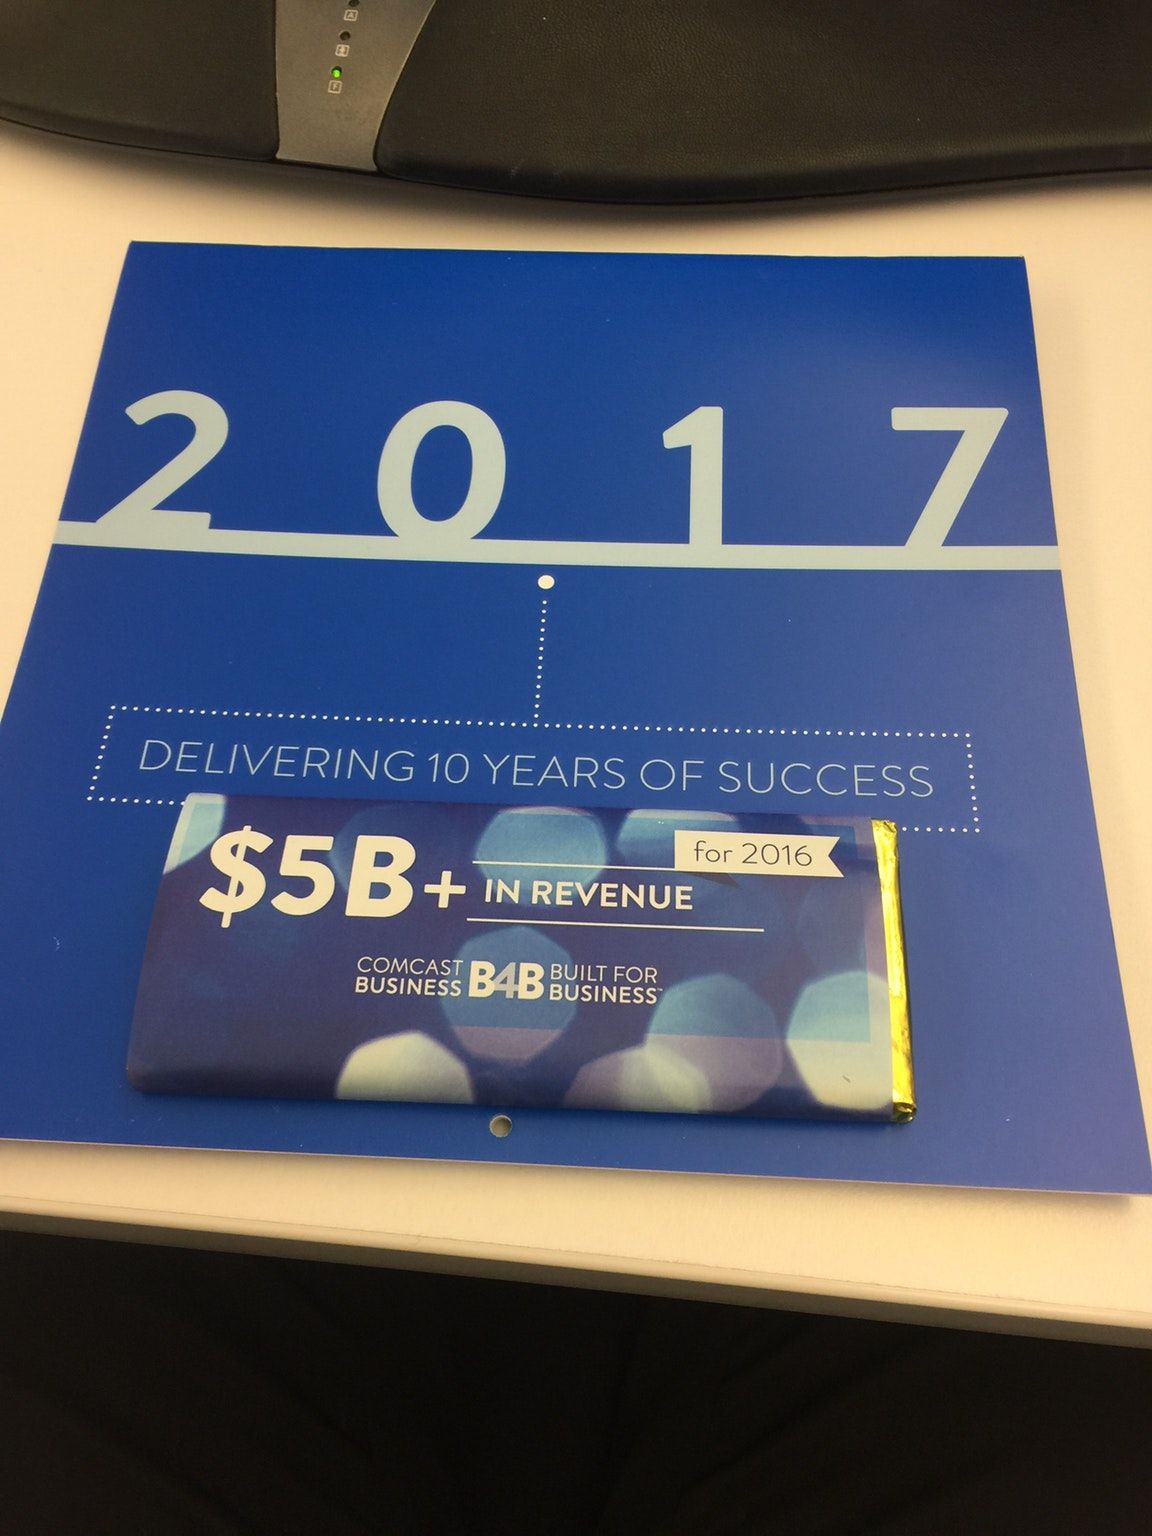 Company made 5 billion last year and all I got was a candy bar.